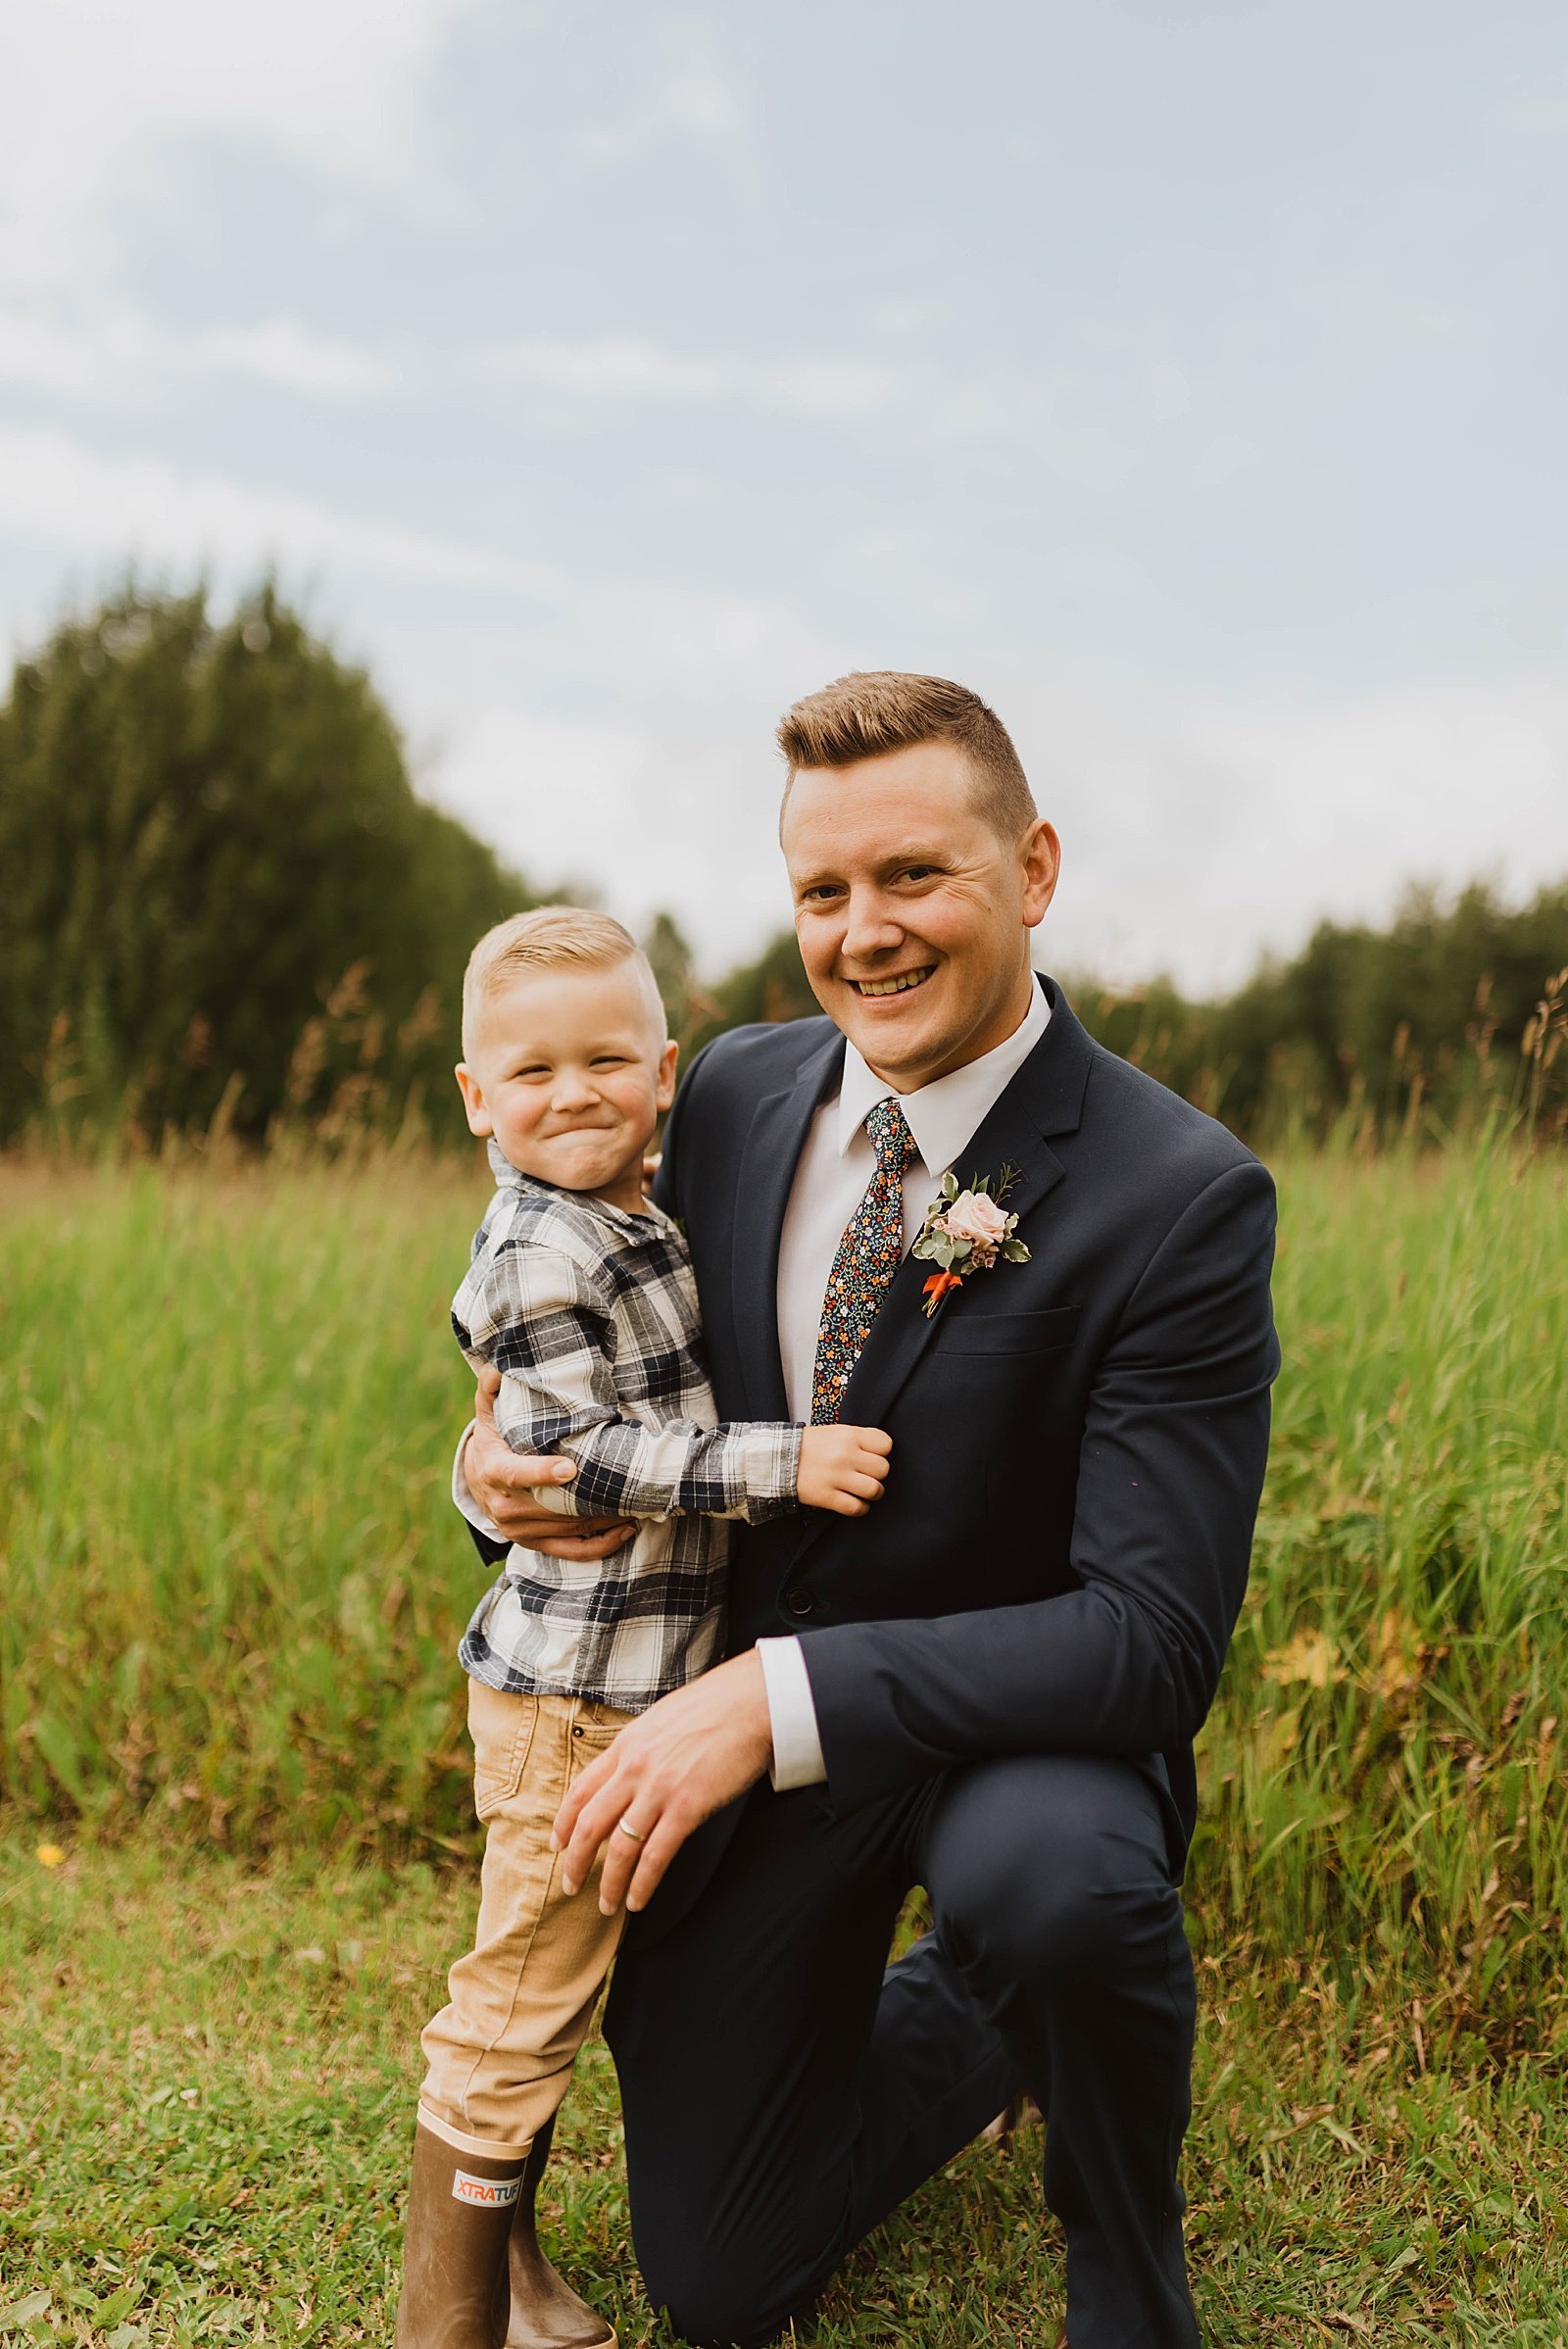  Groom holding son in a plaid shirt on his knee after a family vow renewal in Anchorage.  